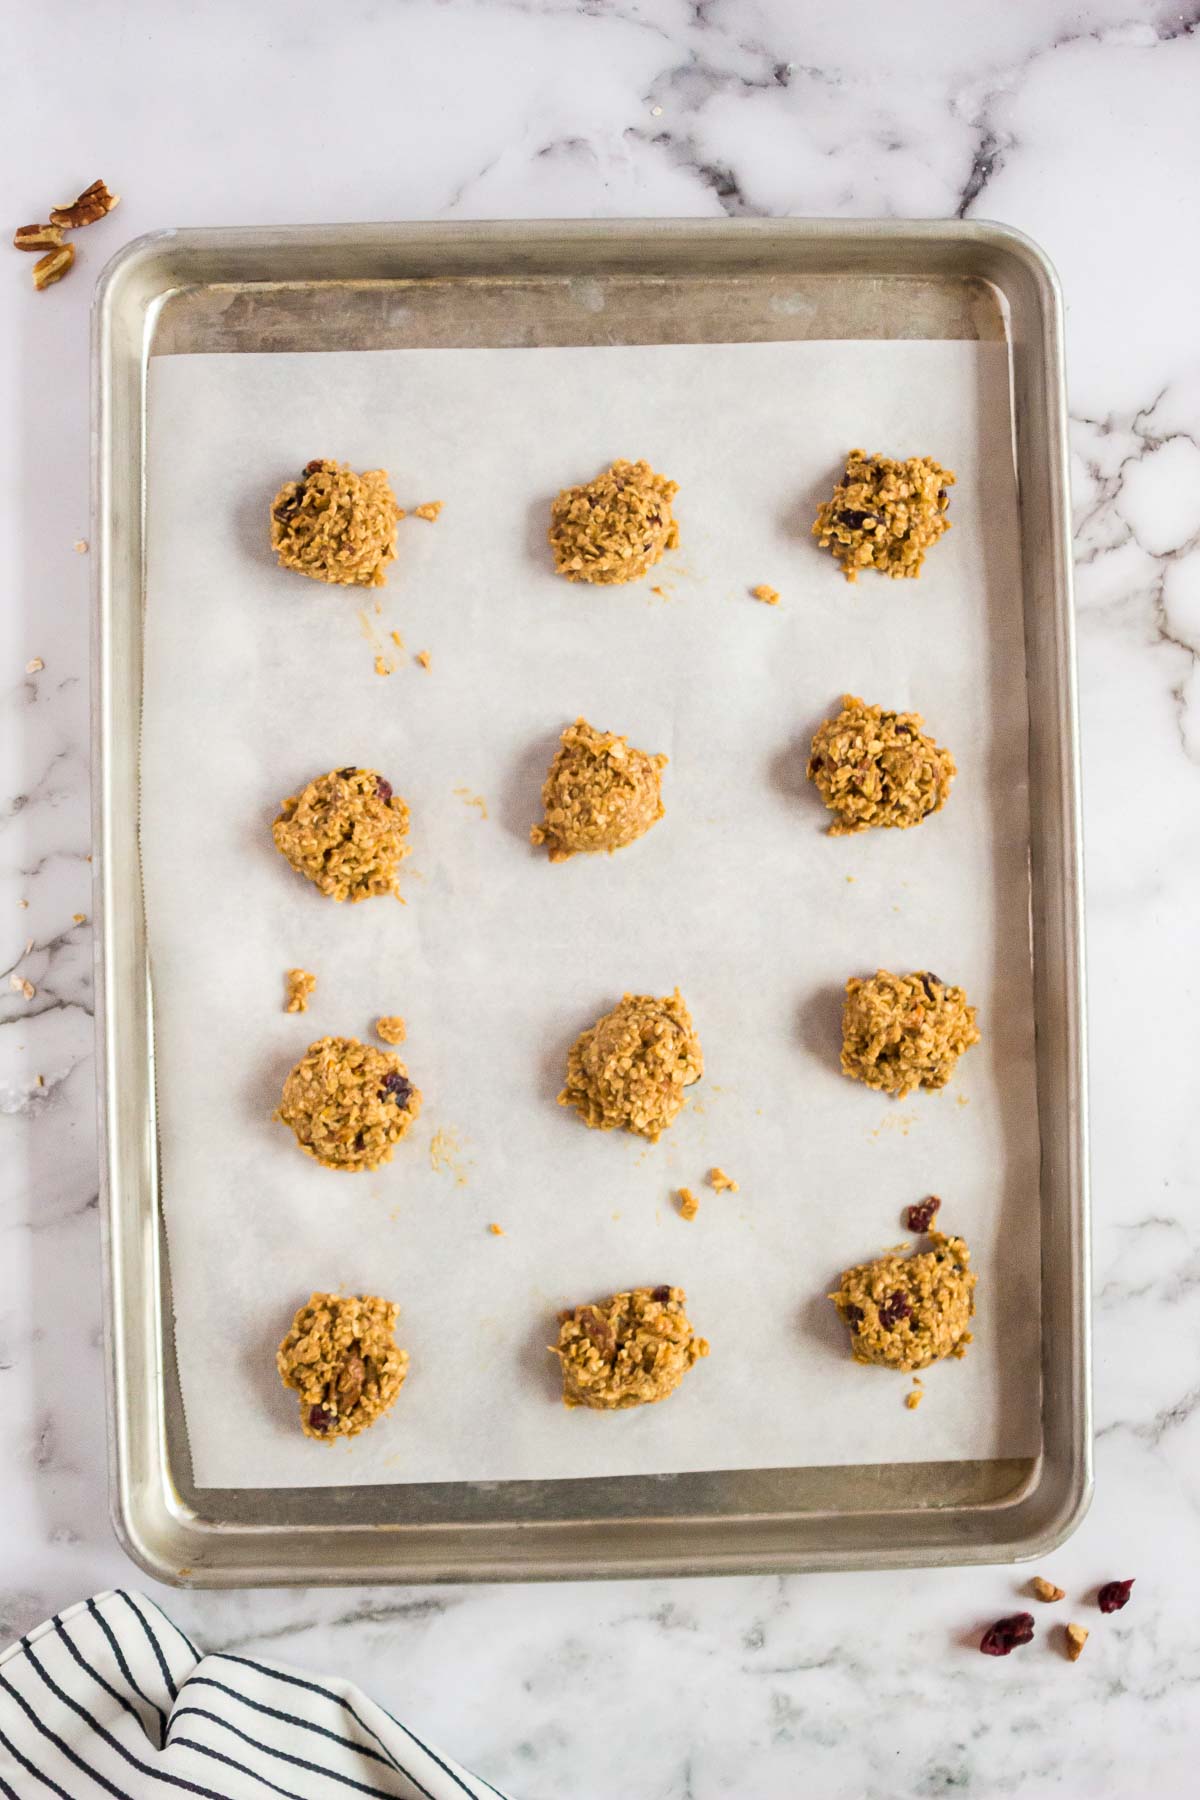 Scoops of oatmeal craisin cookie dough on a baking sheet